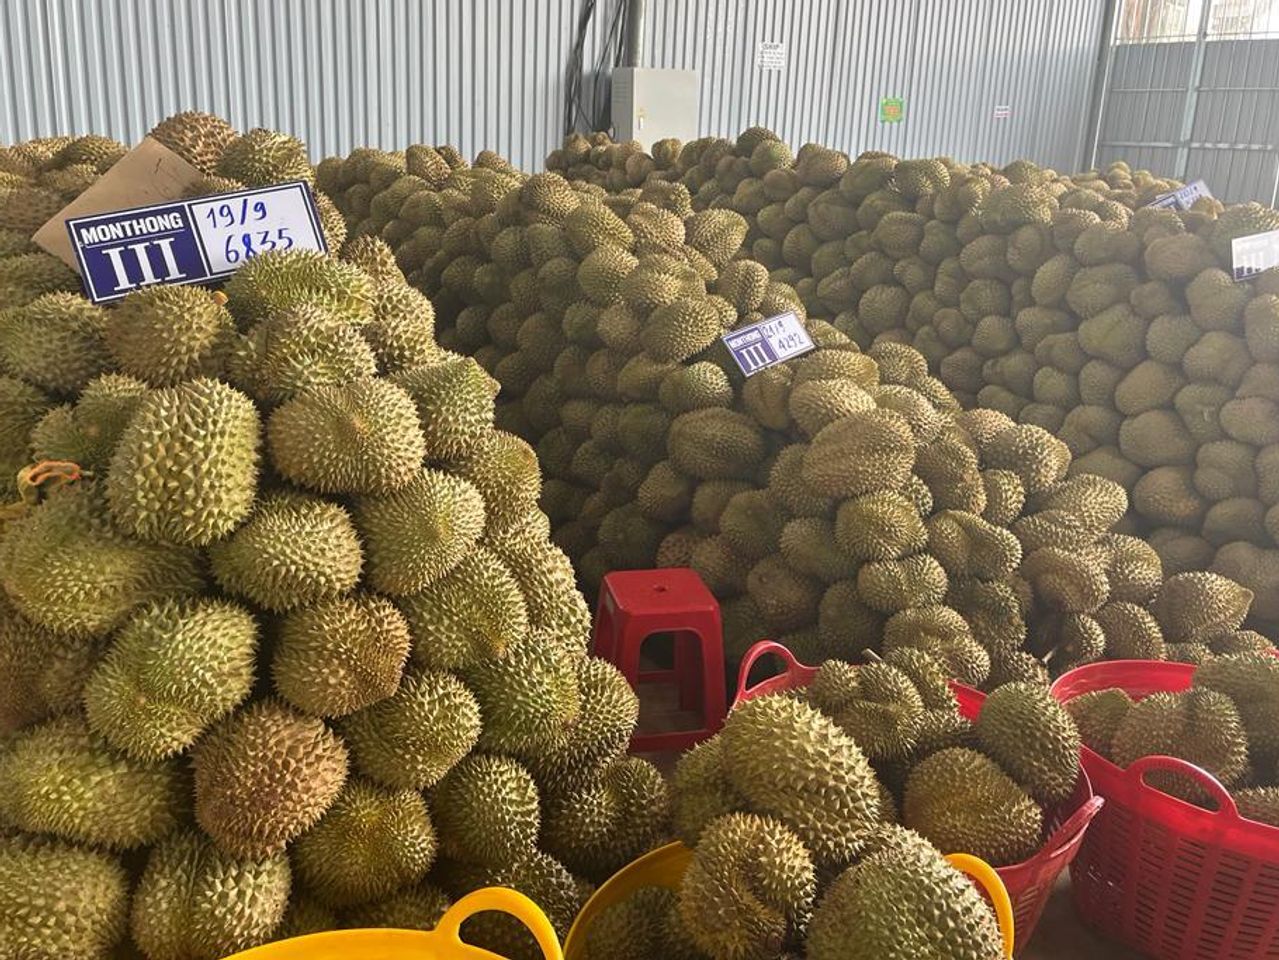 Durian, a pungent fruit, has become wildly popular in China. JON EMONT / THE WALL STREET JOURNAL